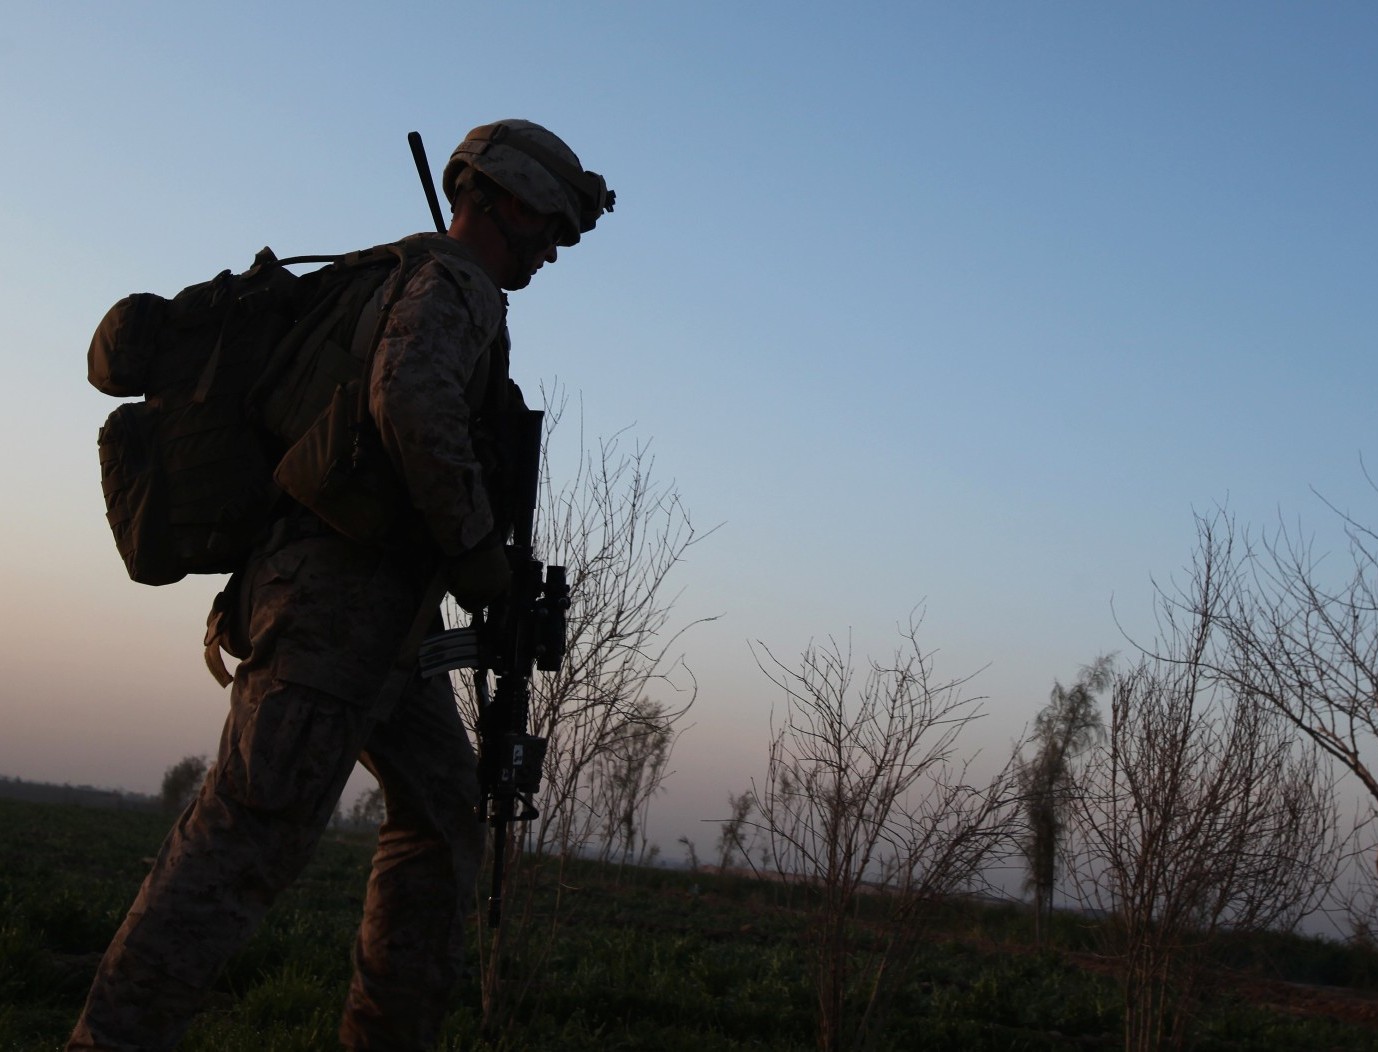 An infantry Marine with 3rd Platoon, Charlie Company, 1st Battalion, 9th Marine Regiment, walks across a field during a security patrol in Helmand province, Afghanistan, Feb. 20, 2014. US Marine Corps Photo